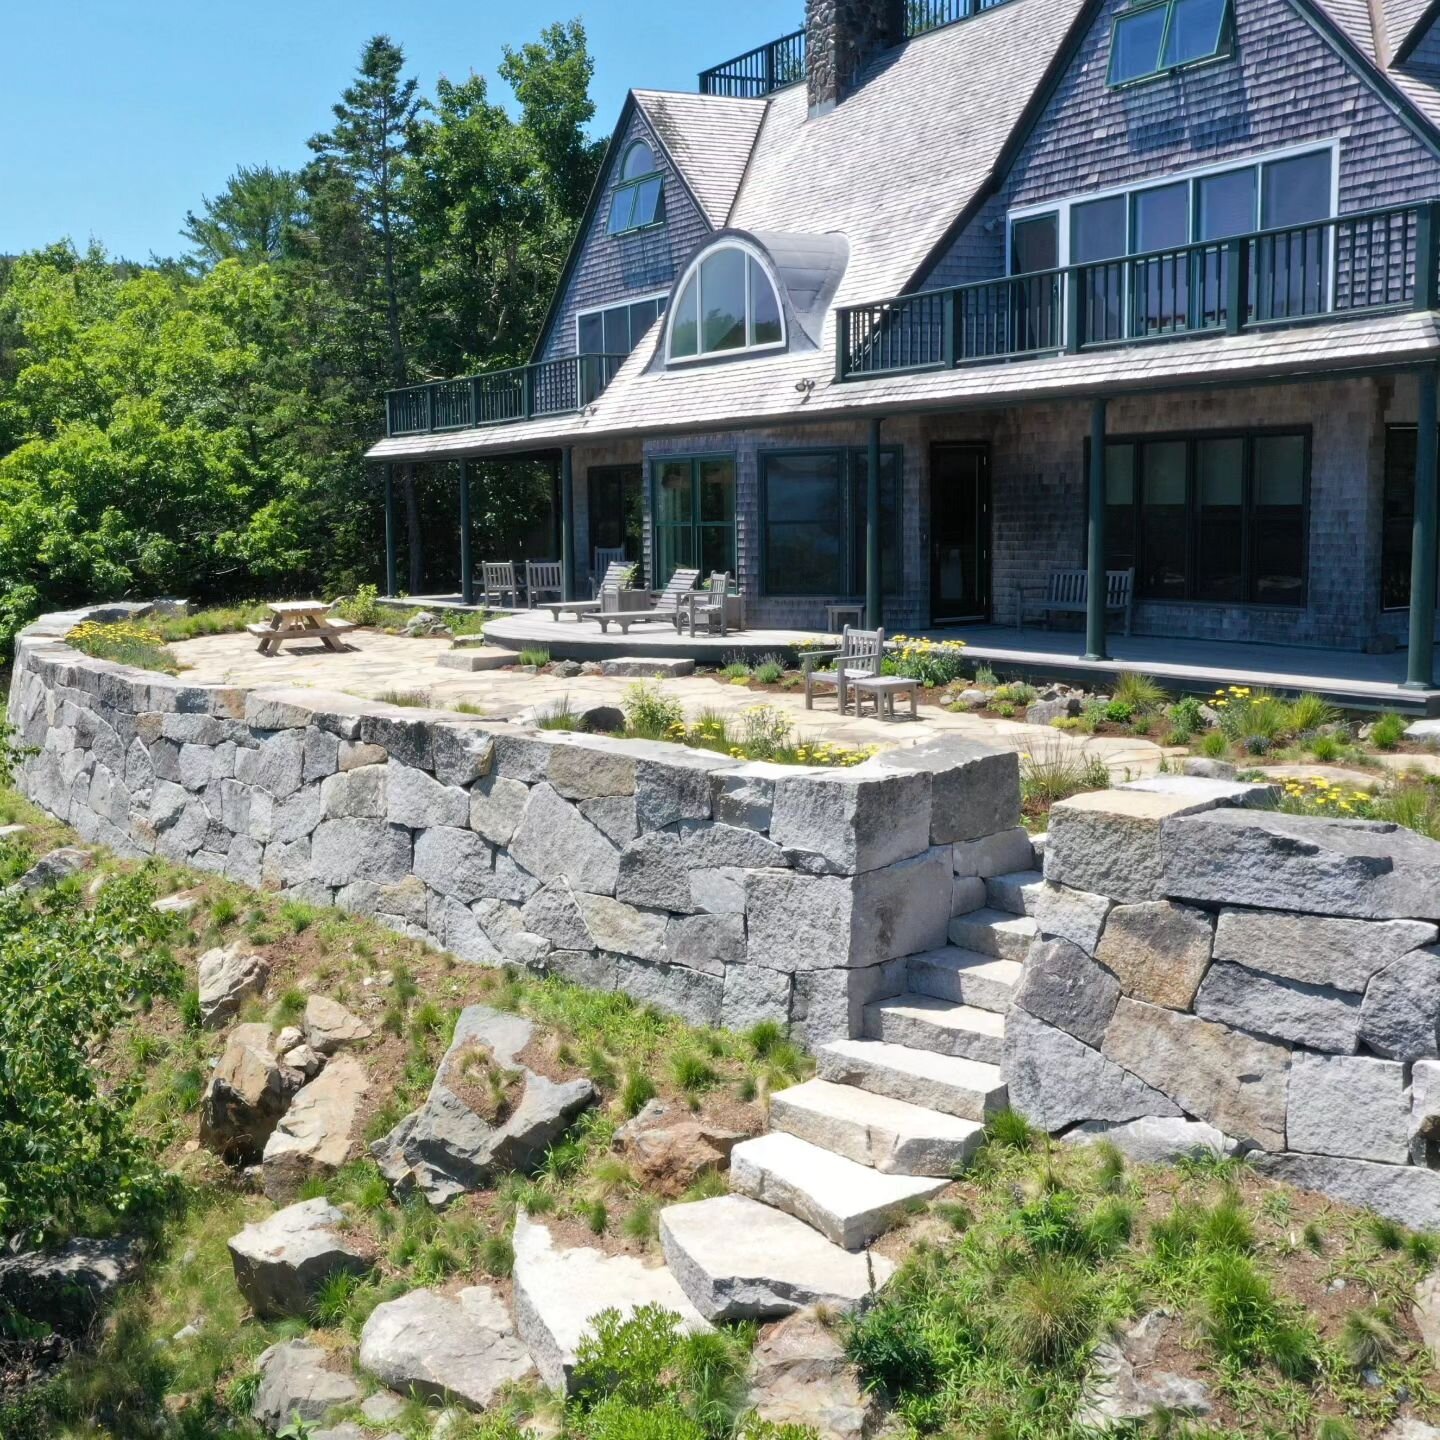 Happy Summer Solstice! We haven't posted in a while, so check out our updated portfolio on our website and let us know what you think.  #summer #bearrock #granite #stonewall @acadialandscape